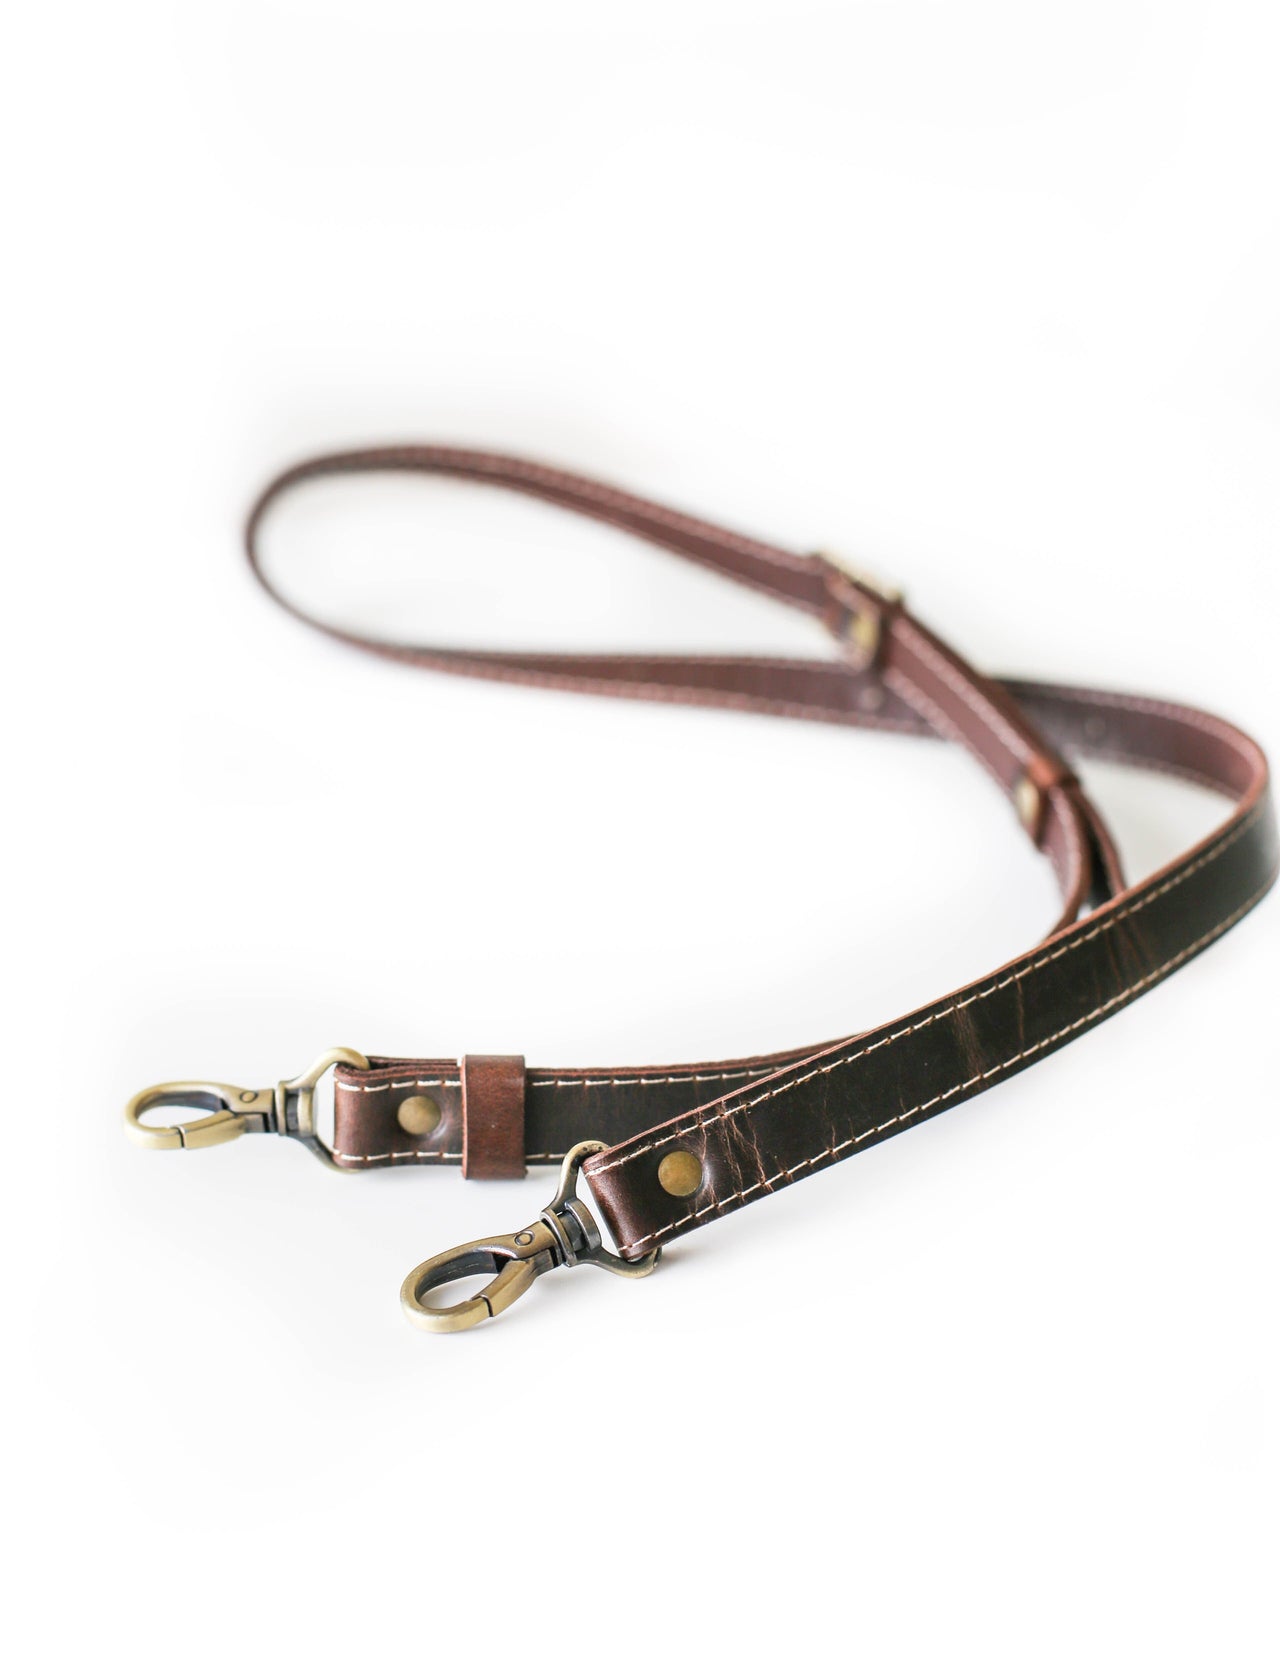 Additional Long Leather Strap for QisaBags